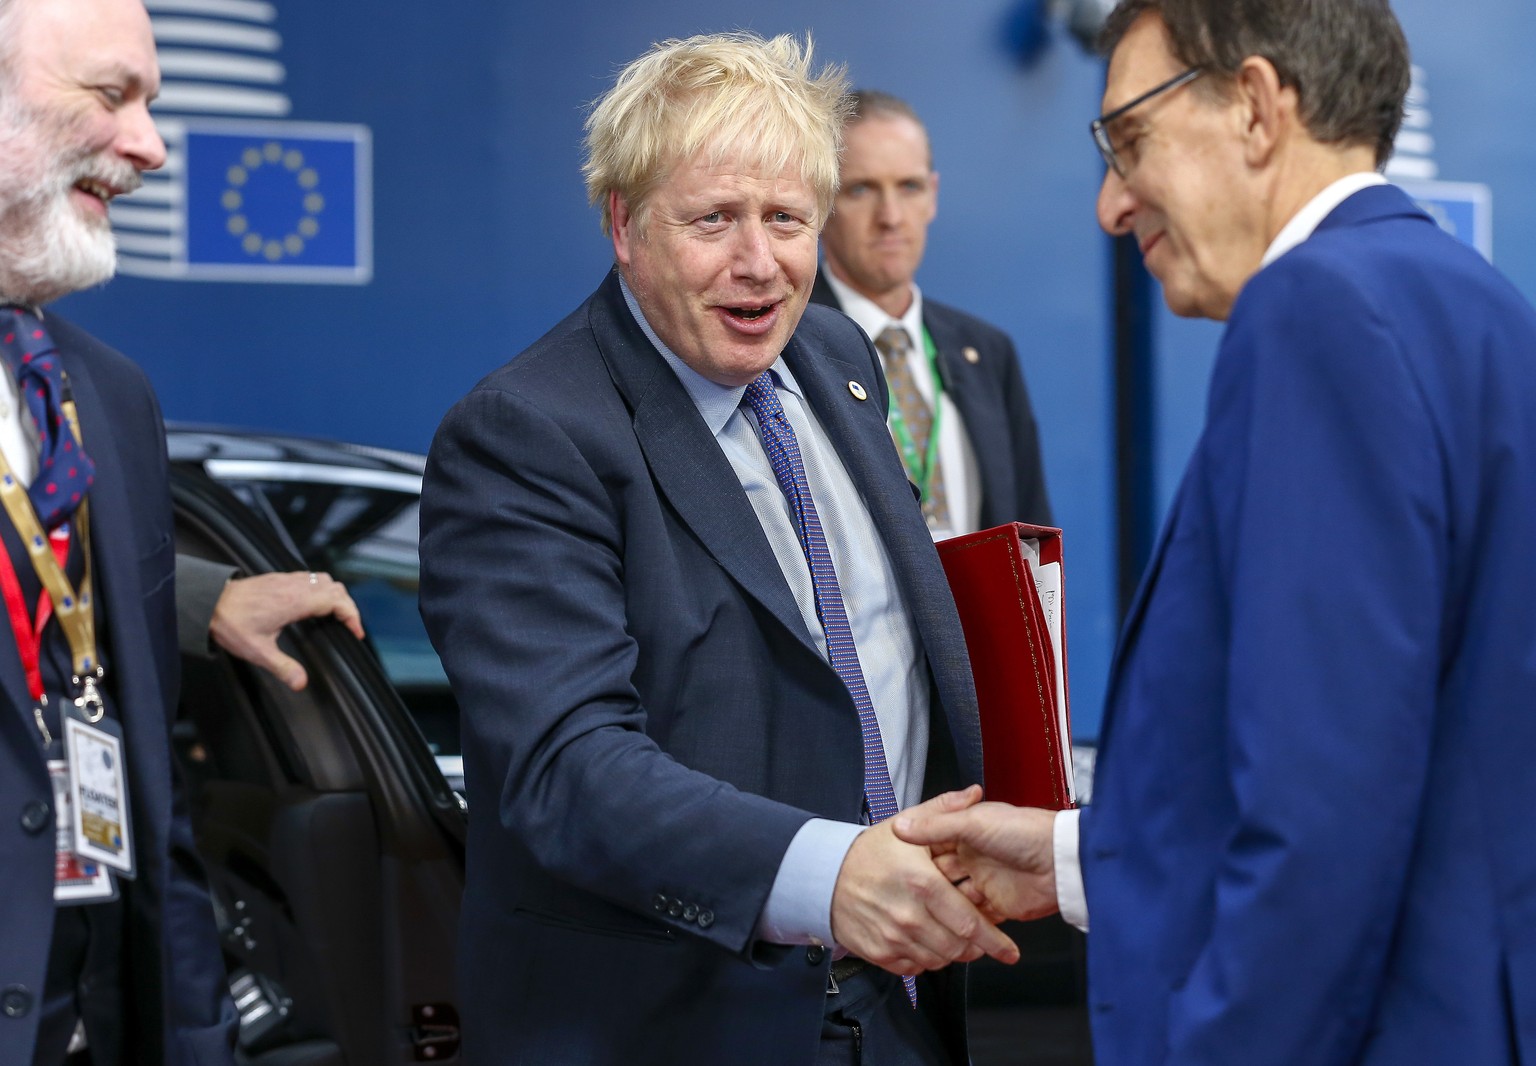 British Prime Minister Boris Johnson arrives for an EU summit in Brussels, Thursday, Oct. 17, 2019. Britain and the European Union reached a new tentative Brexit deal on Thursday, hoping to finally es ...